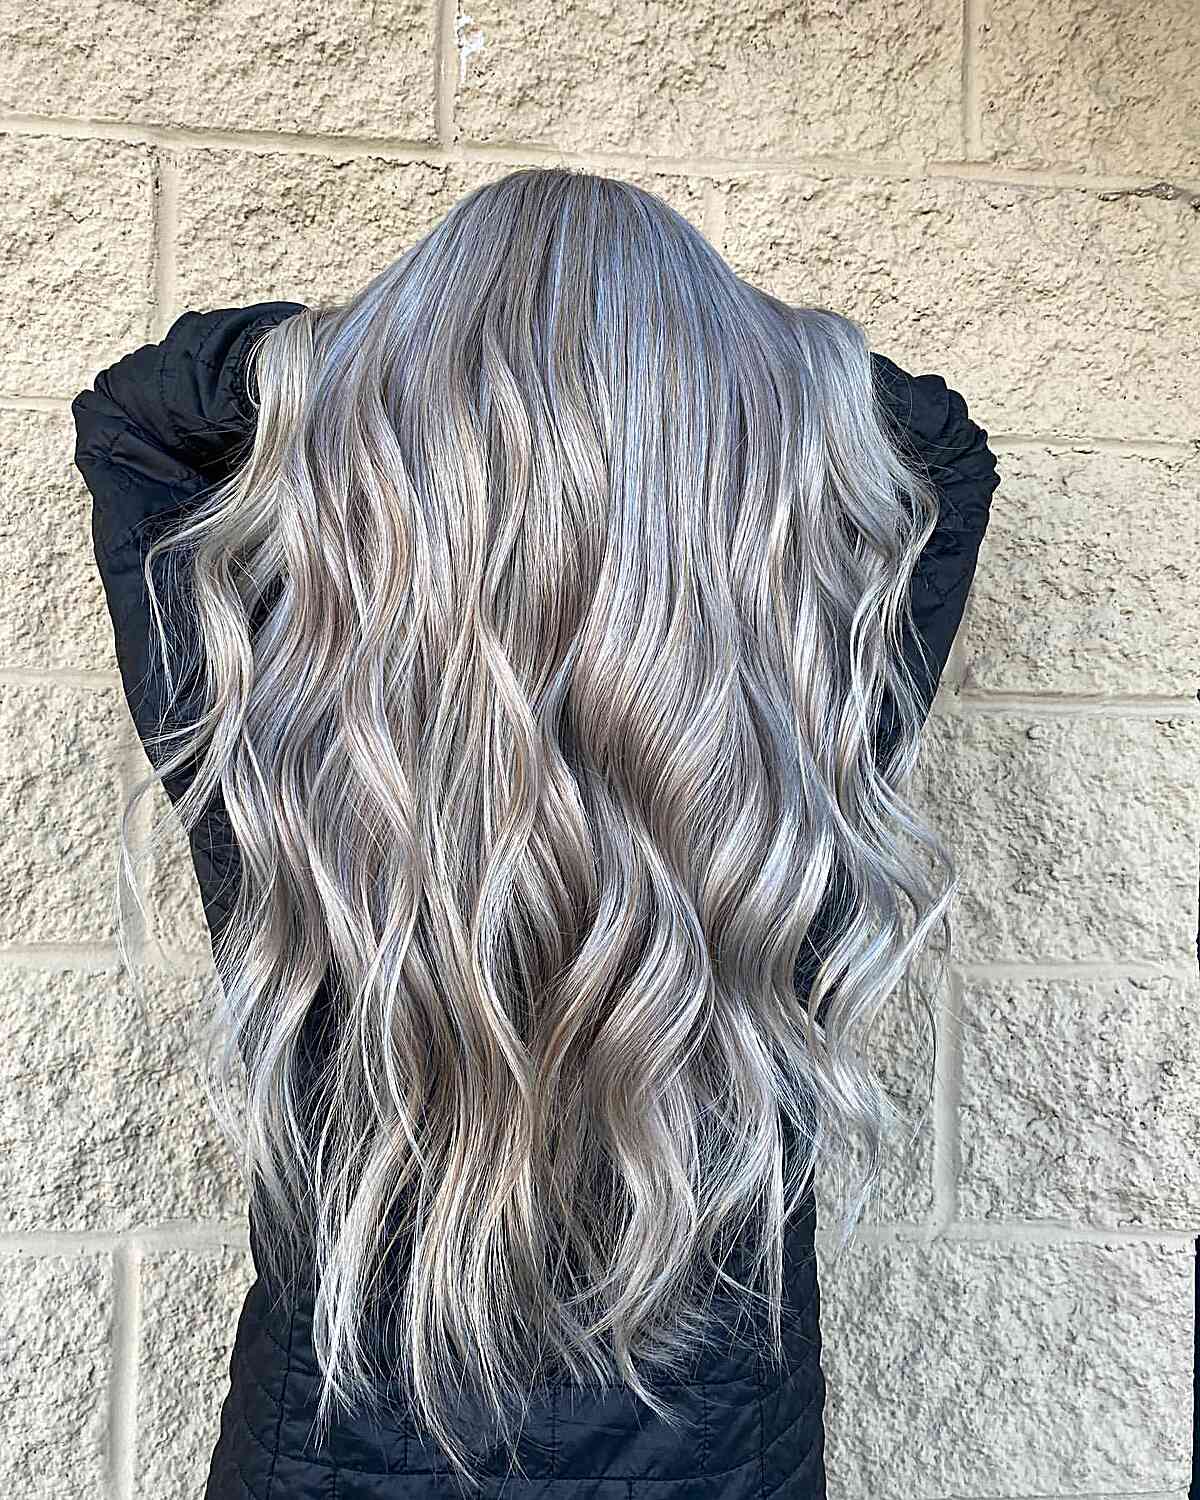 Dimensional Dark Platinum and Silver Highlights with Long Loose Waves and Choppy Layers